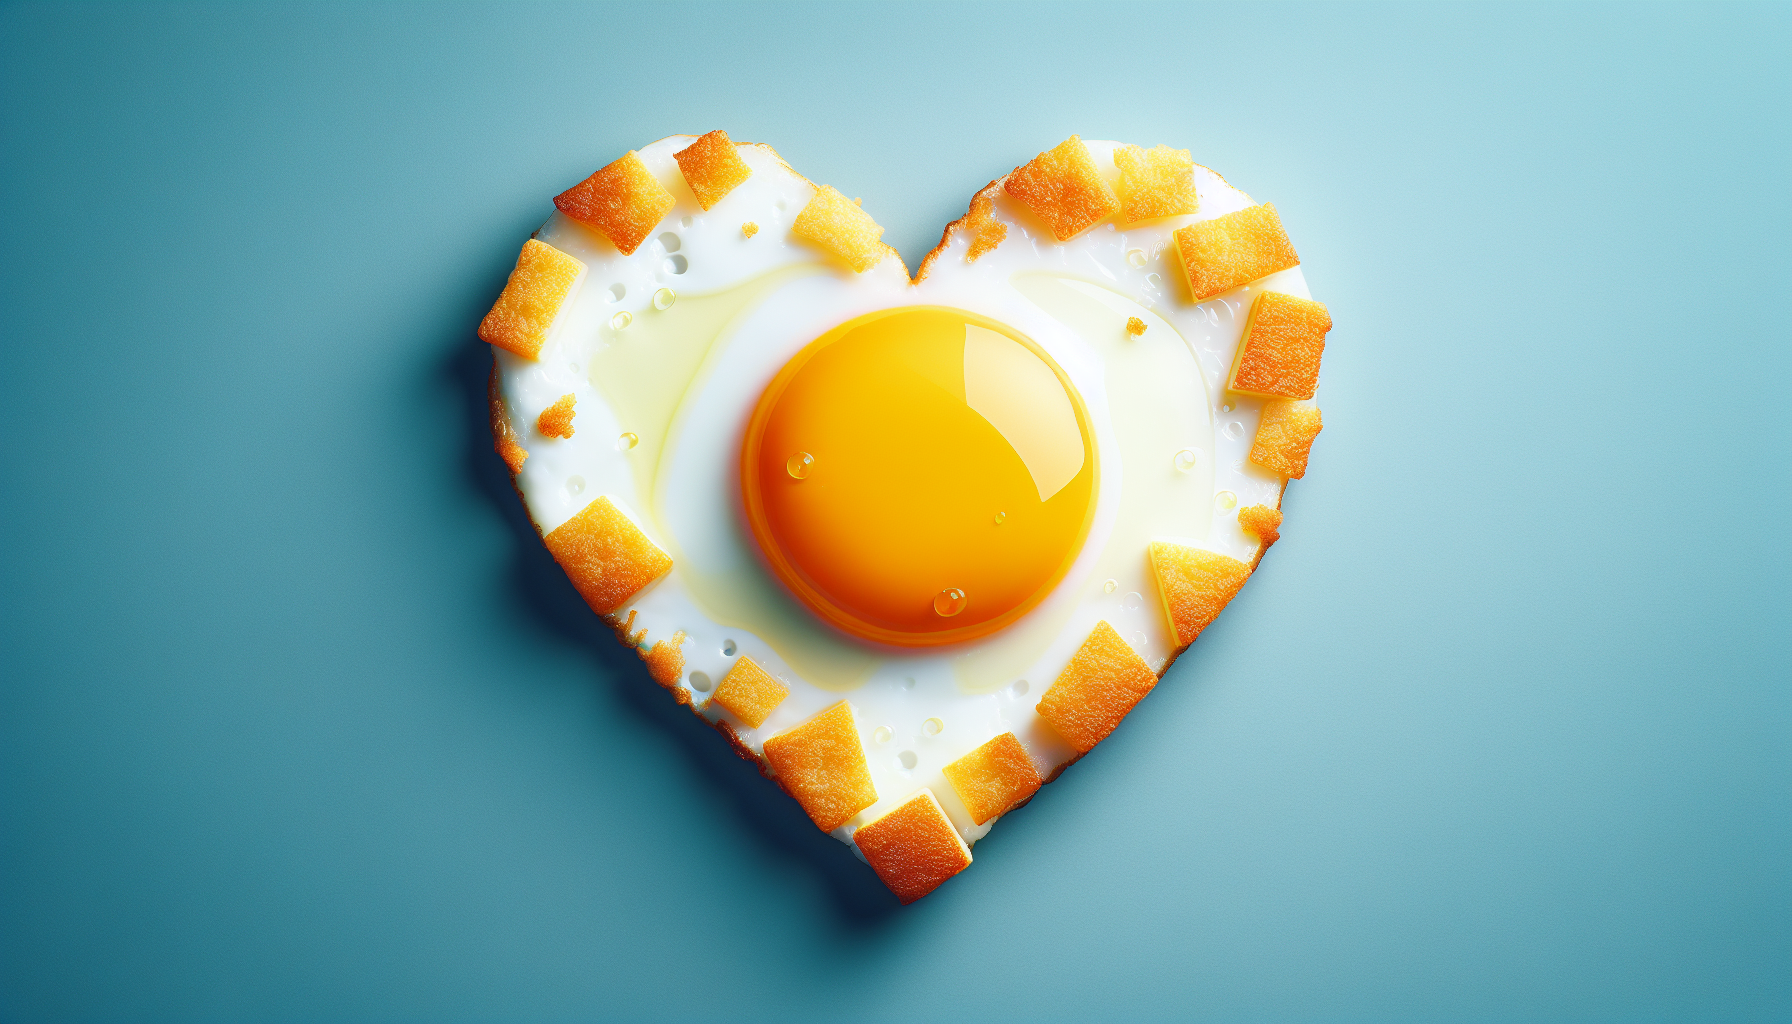 How Does A High-fat Diet Impact Cholesterol Levels?